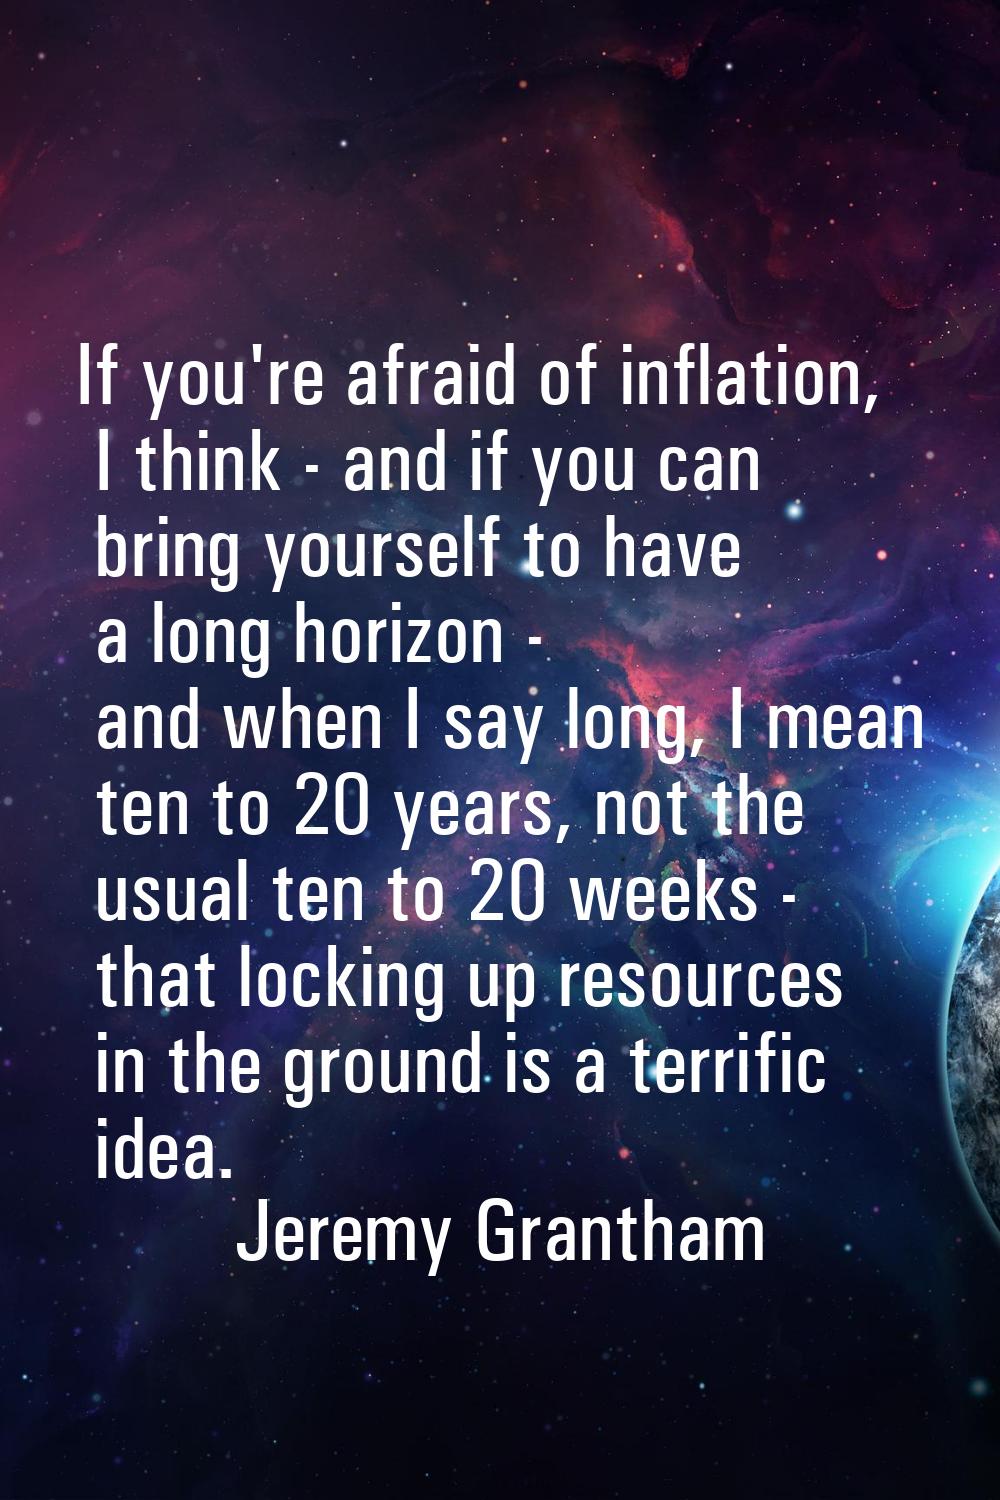 If you're afraid of inflation, I think - and if you can bring yourself to have a long horizon - and